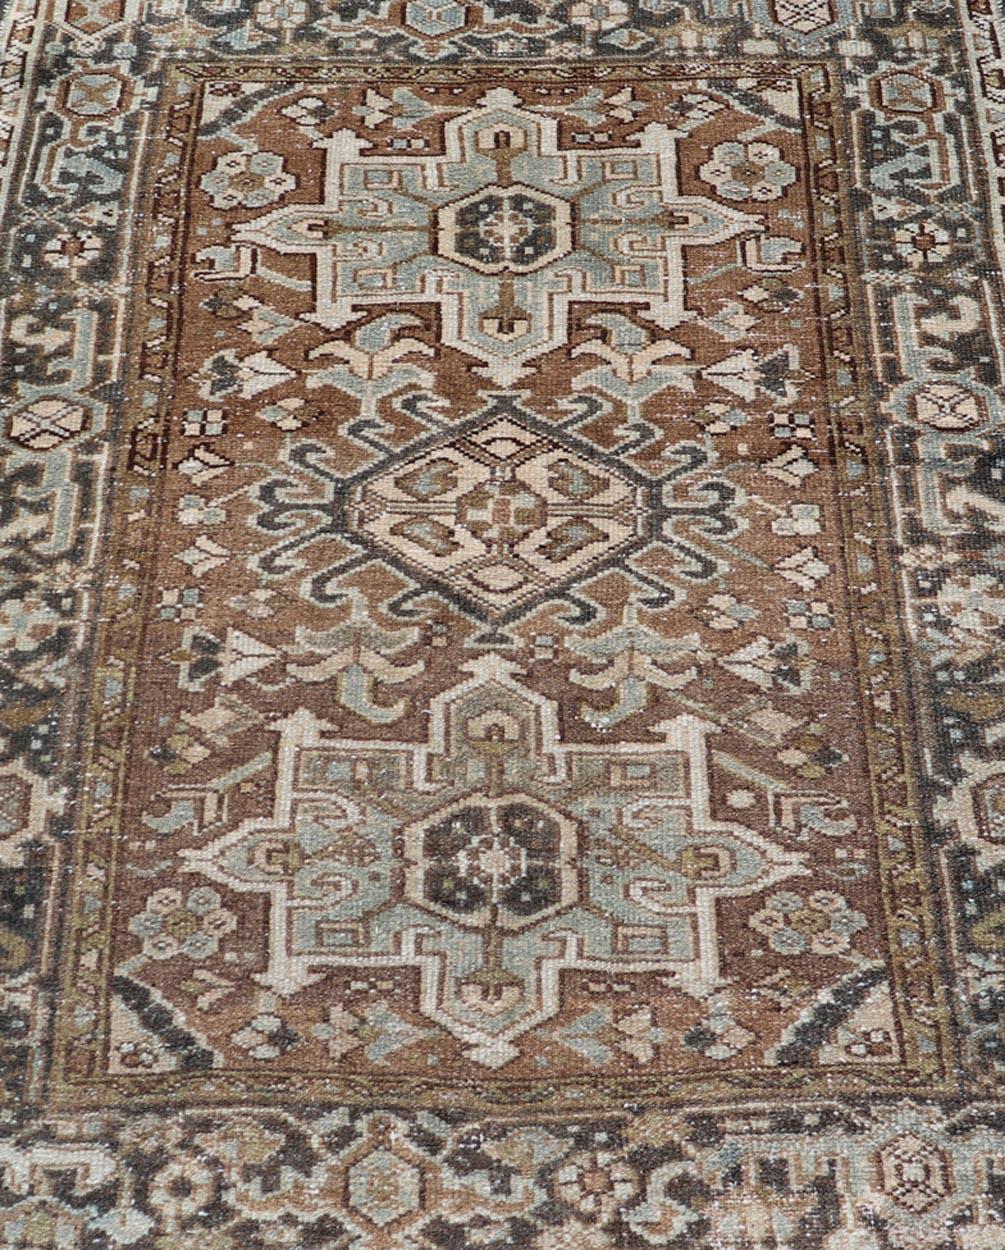 Wool Antique Persian Heriz Rug with Geometric Medallion Design in Mocha, Blue, & Tan For Sale